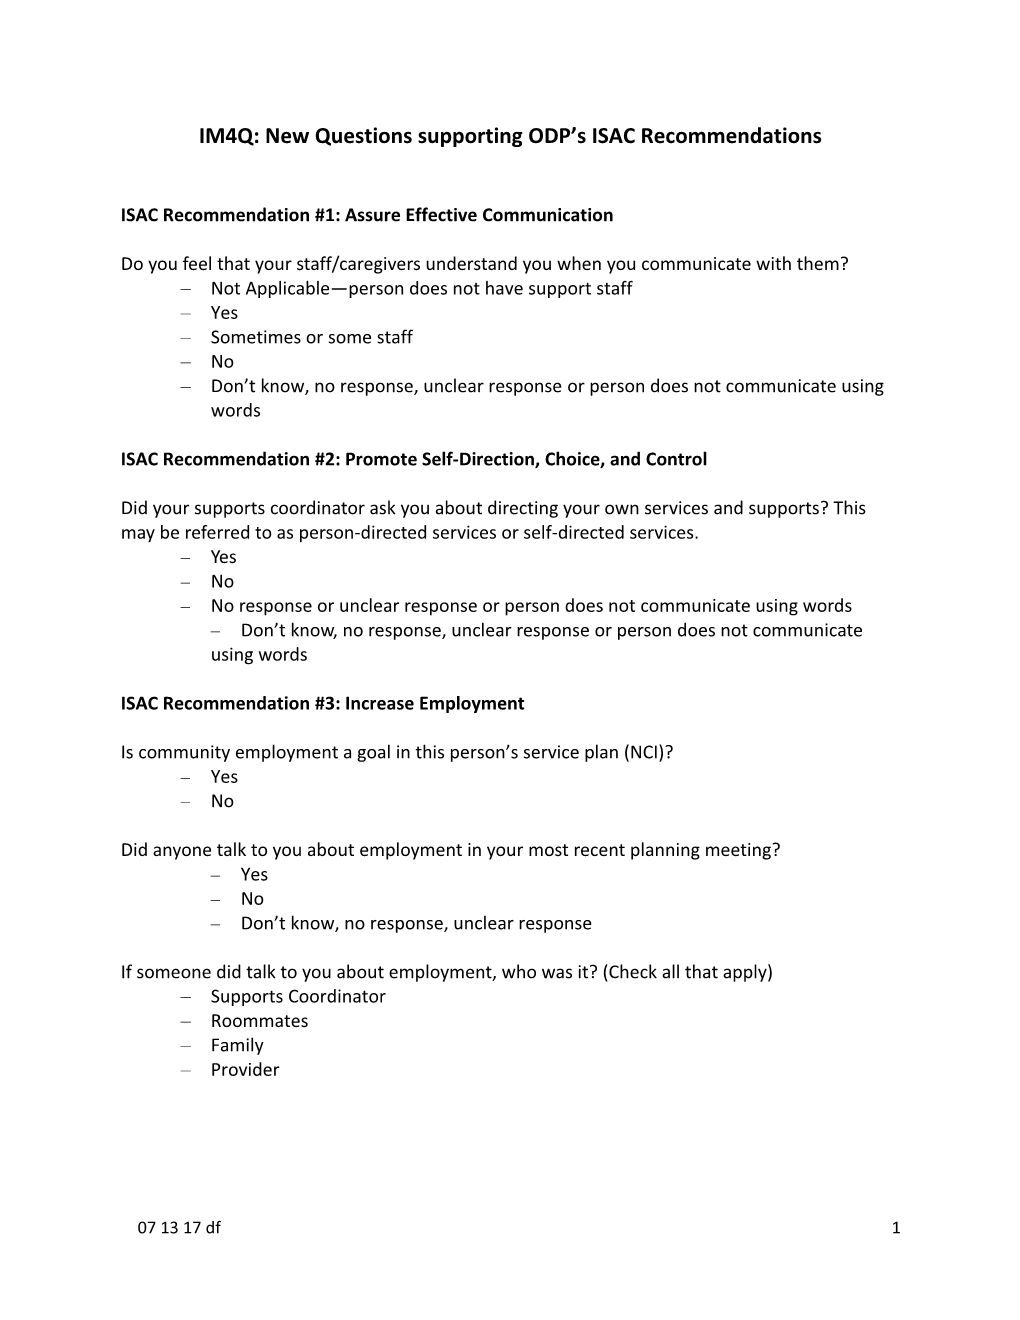 IM4Q: New Questions Supporting ODP S ISAC Recommendations